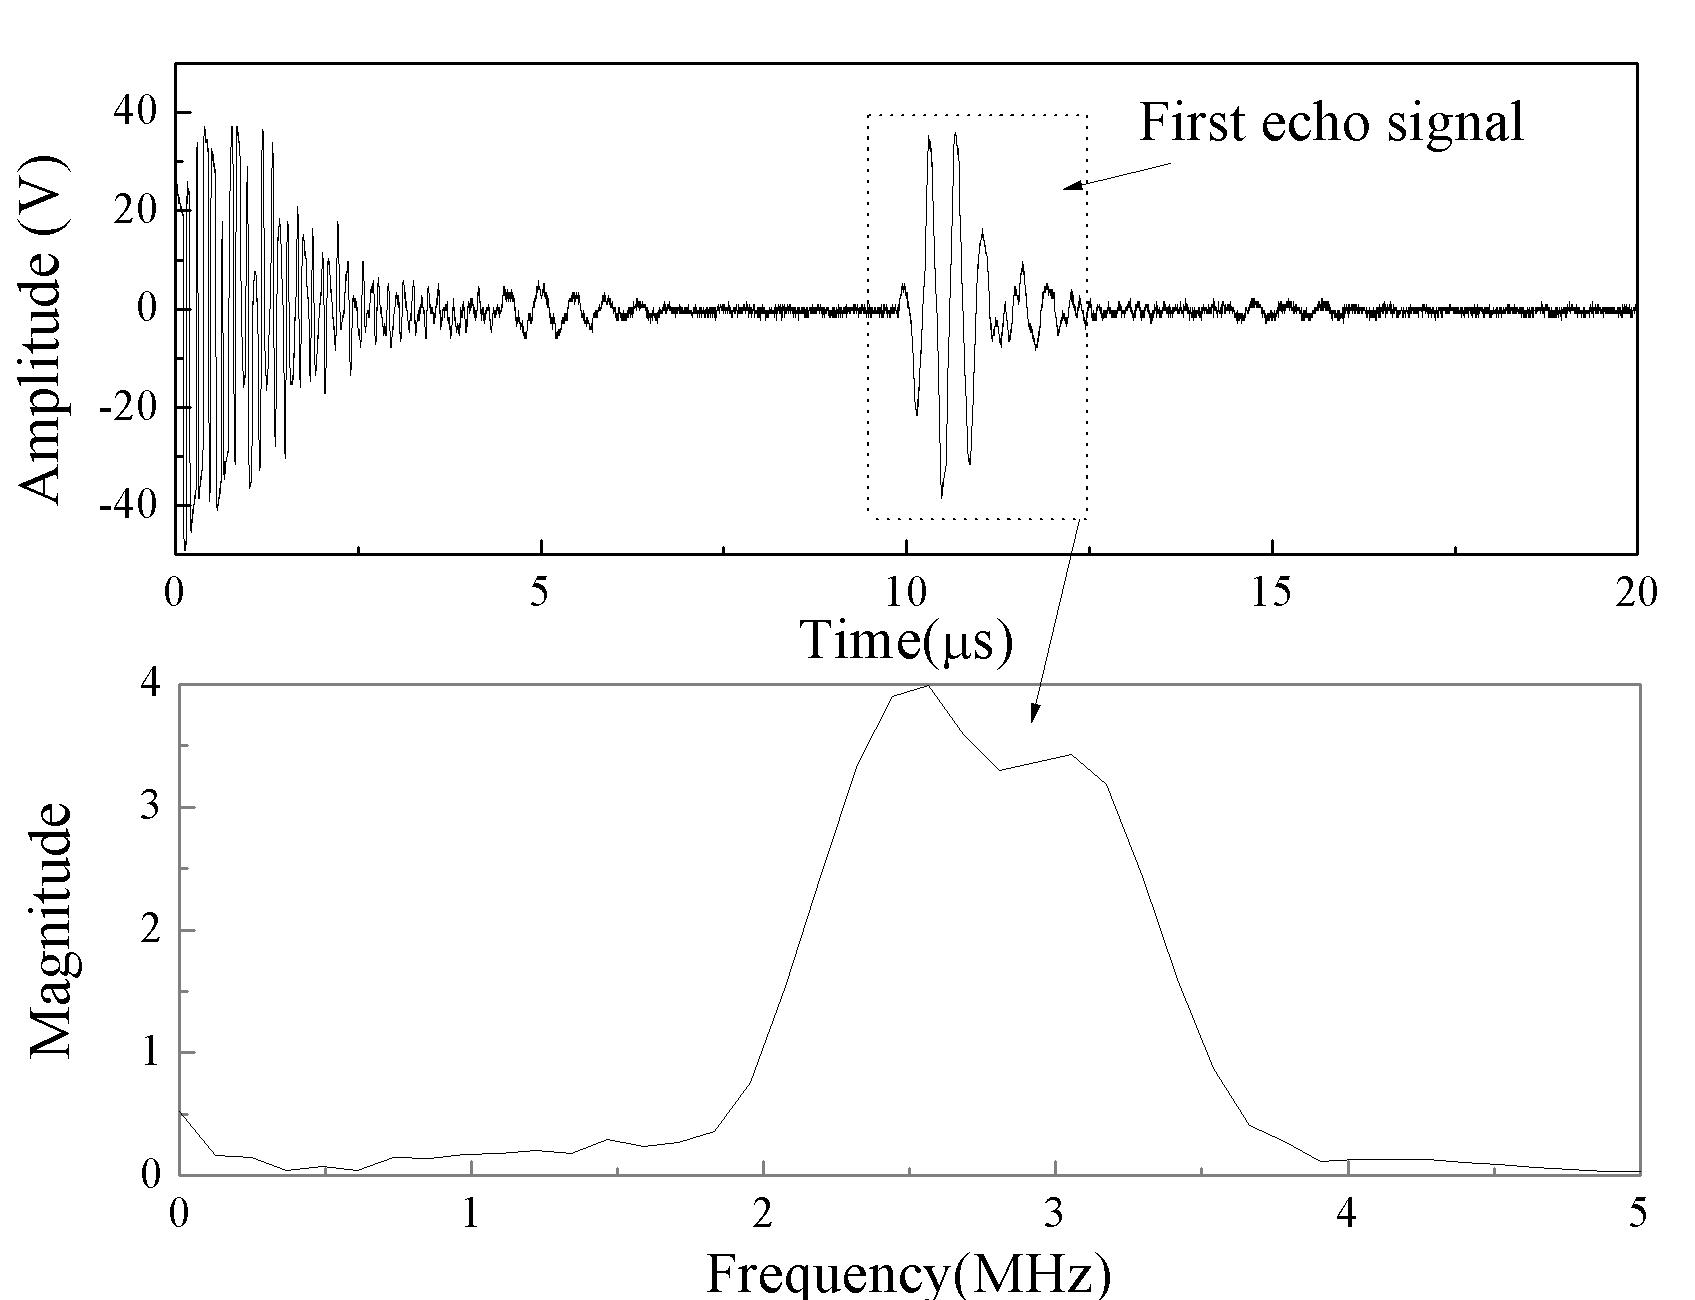 First echo signal and its frequency spectrum of flexible phased ultrasonic transducer